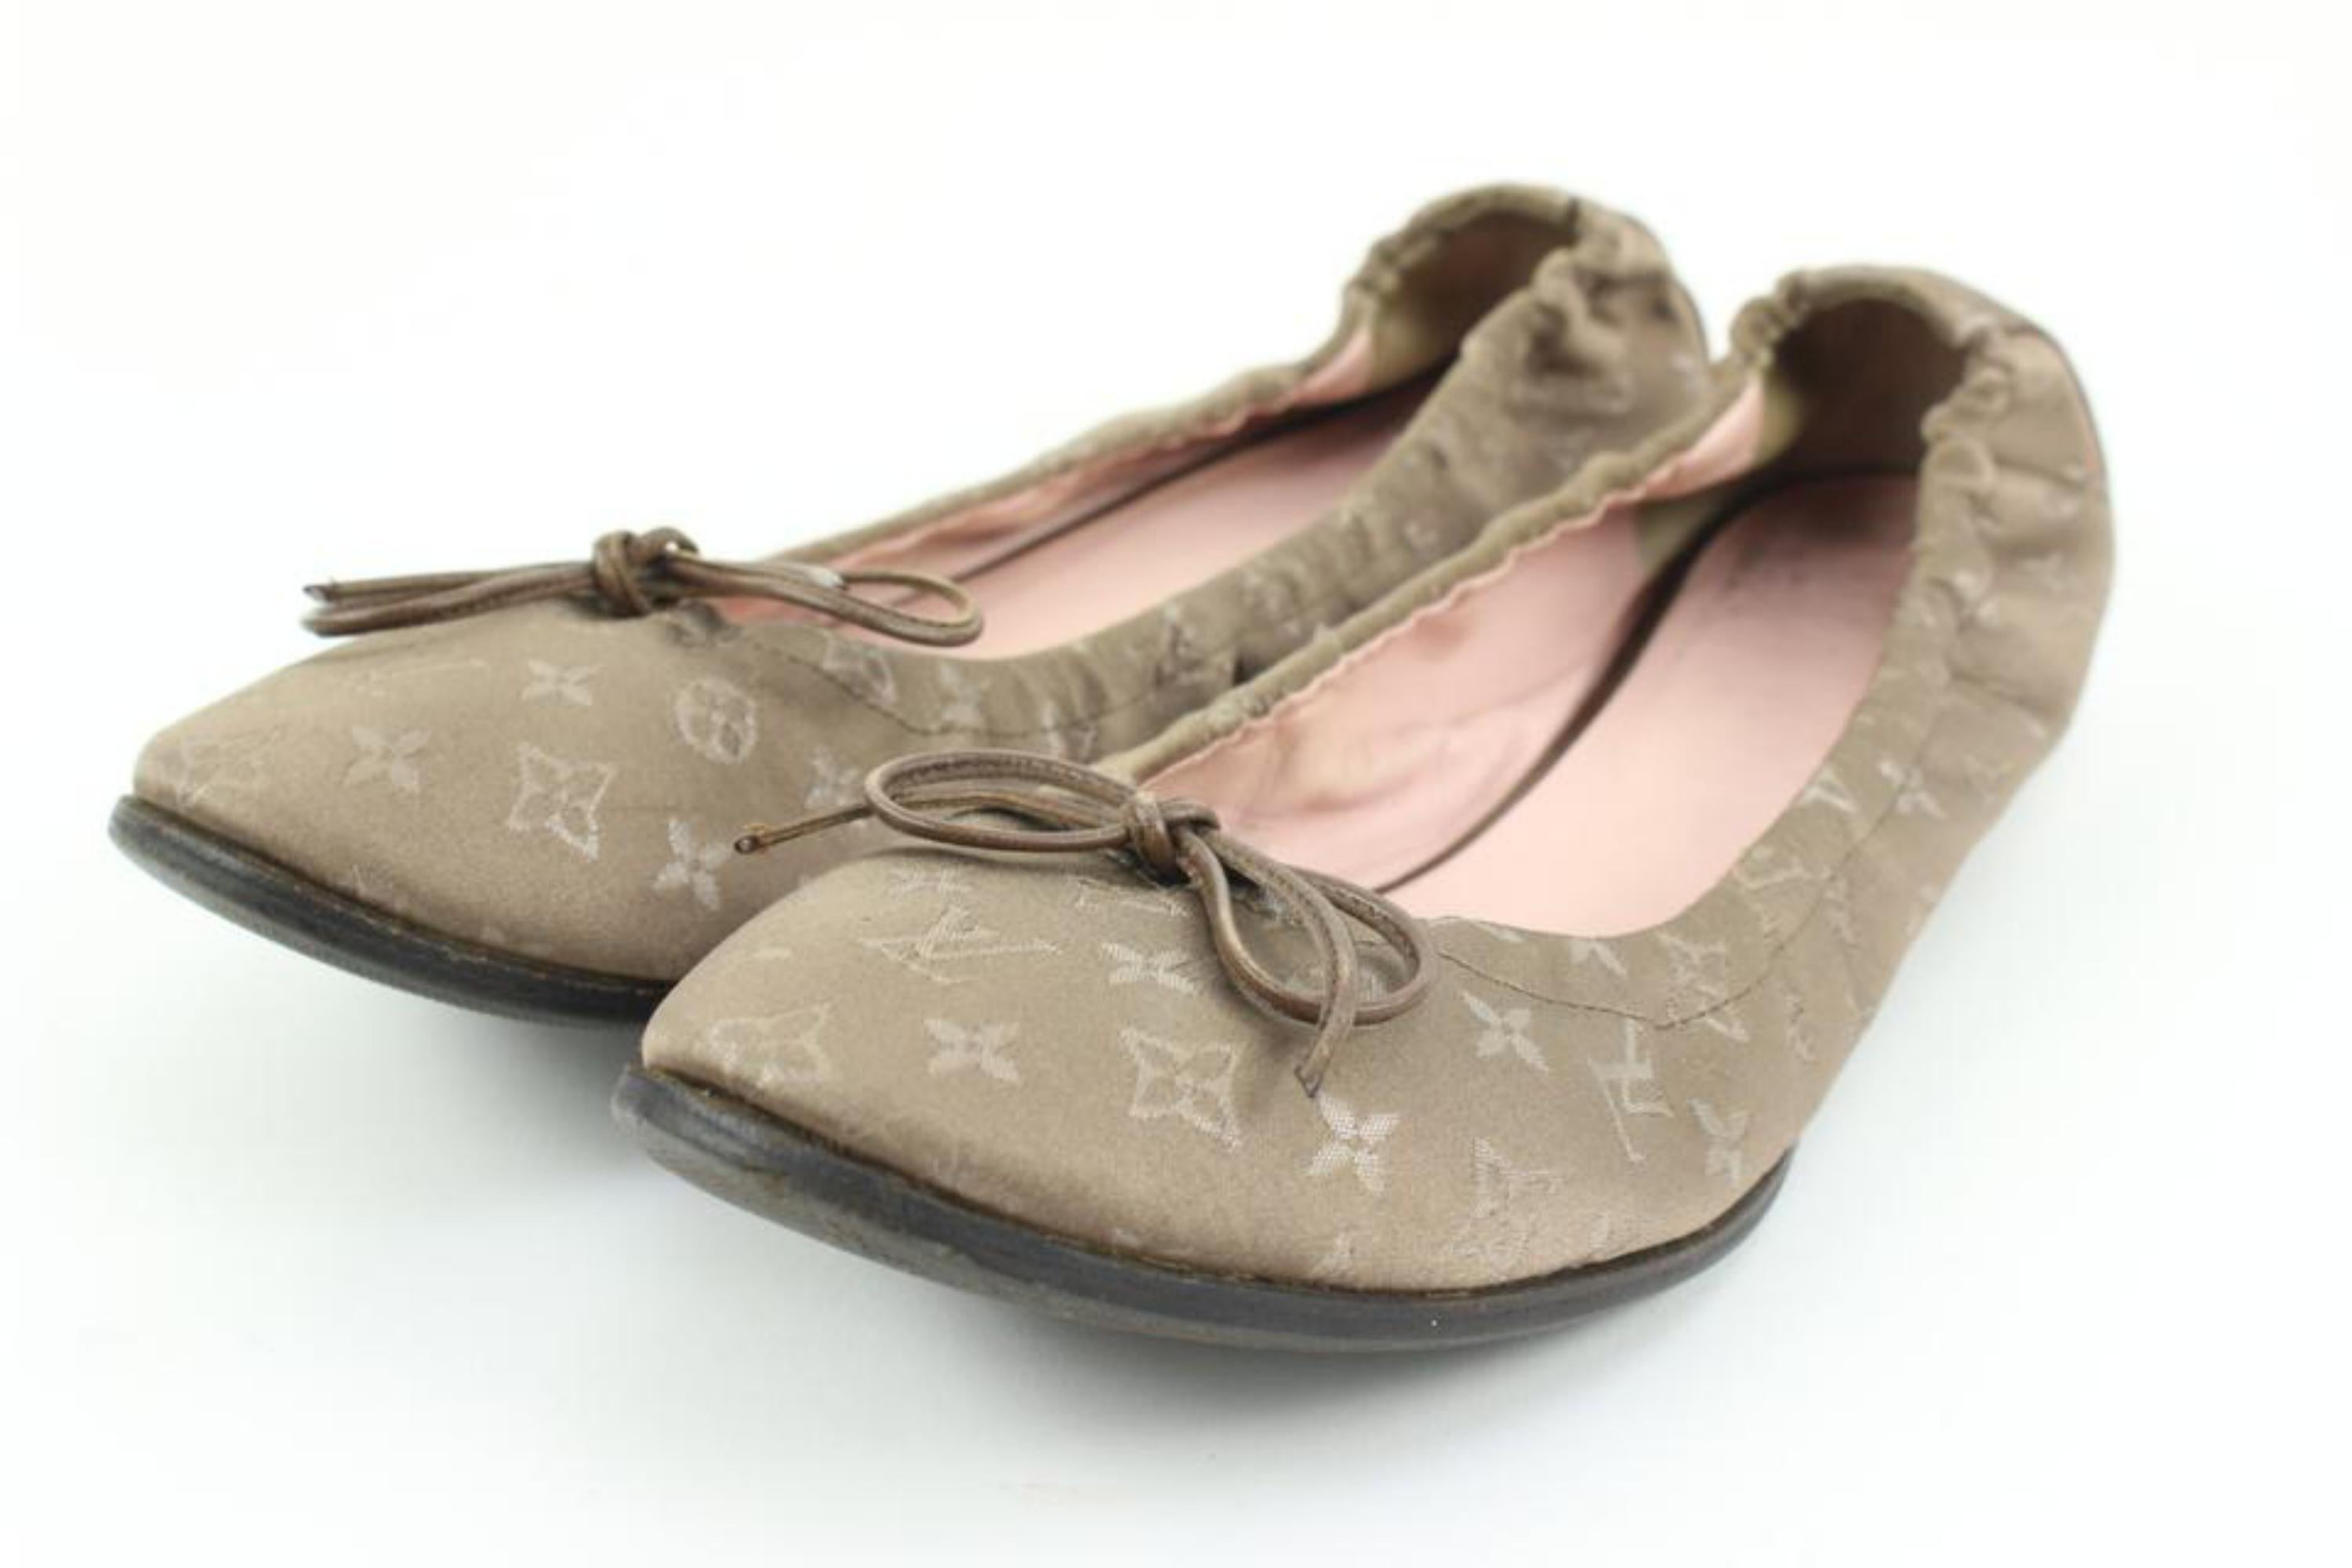 Louis Vuitton Size 37 Monogram Satin  Ballerina Flats 61lv32s
Date Code/Serial Number: IR1010
Made In: Italy
Measurements: Length:  9